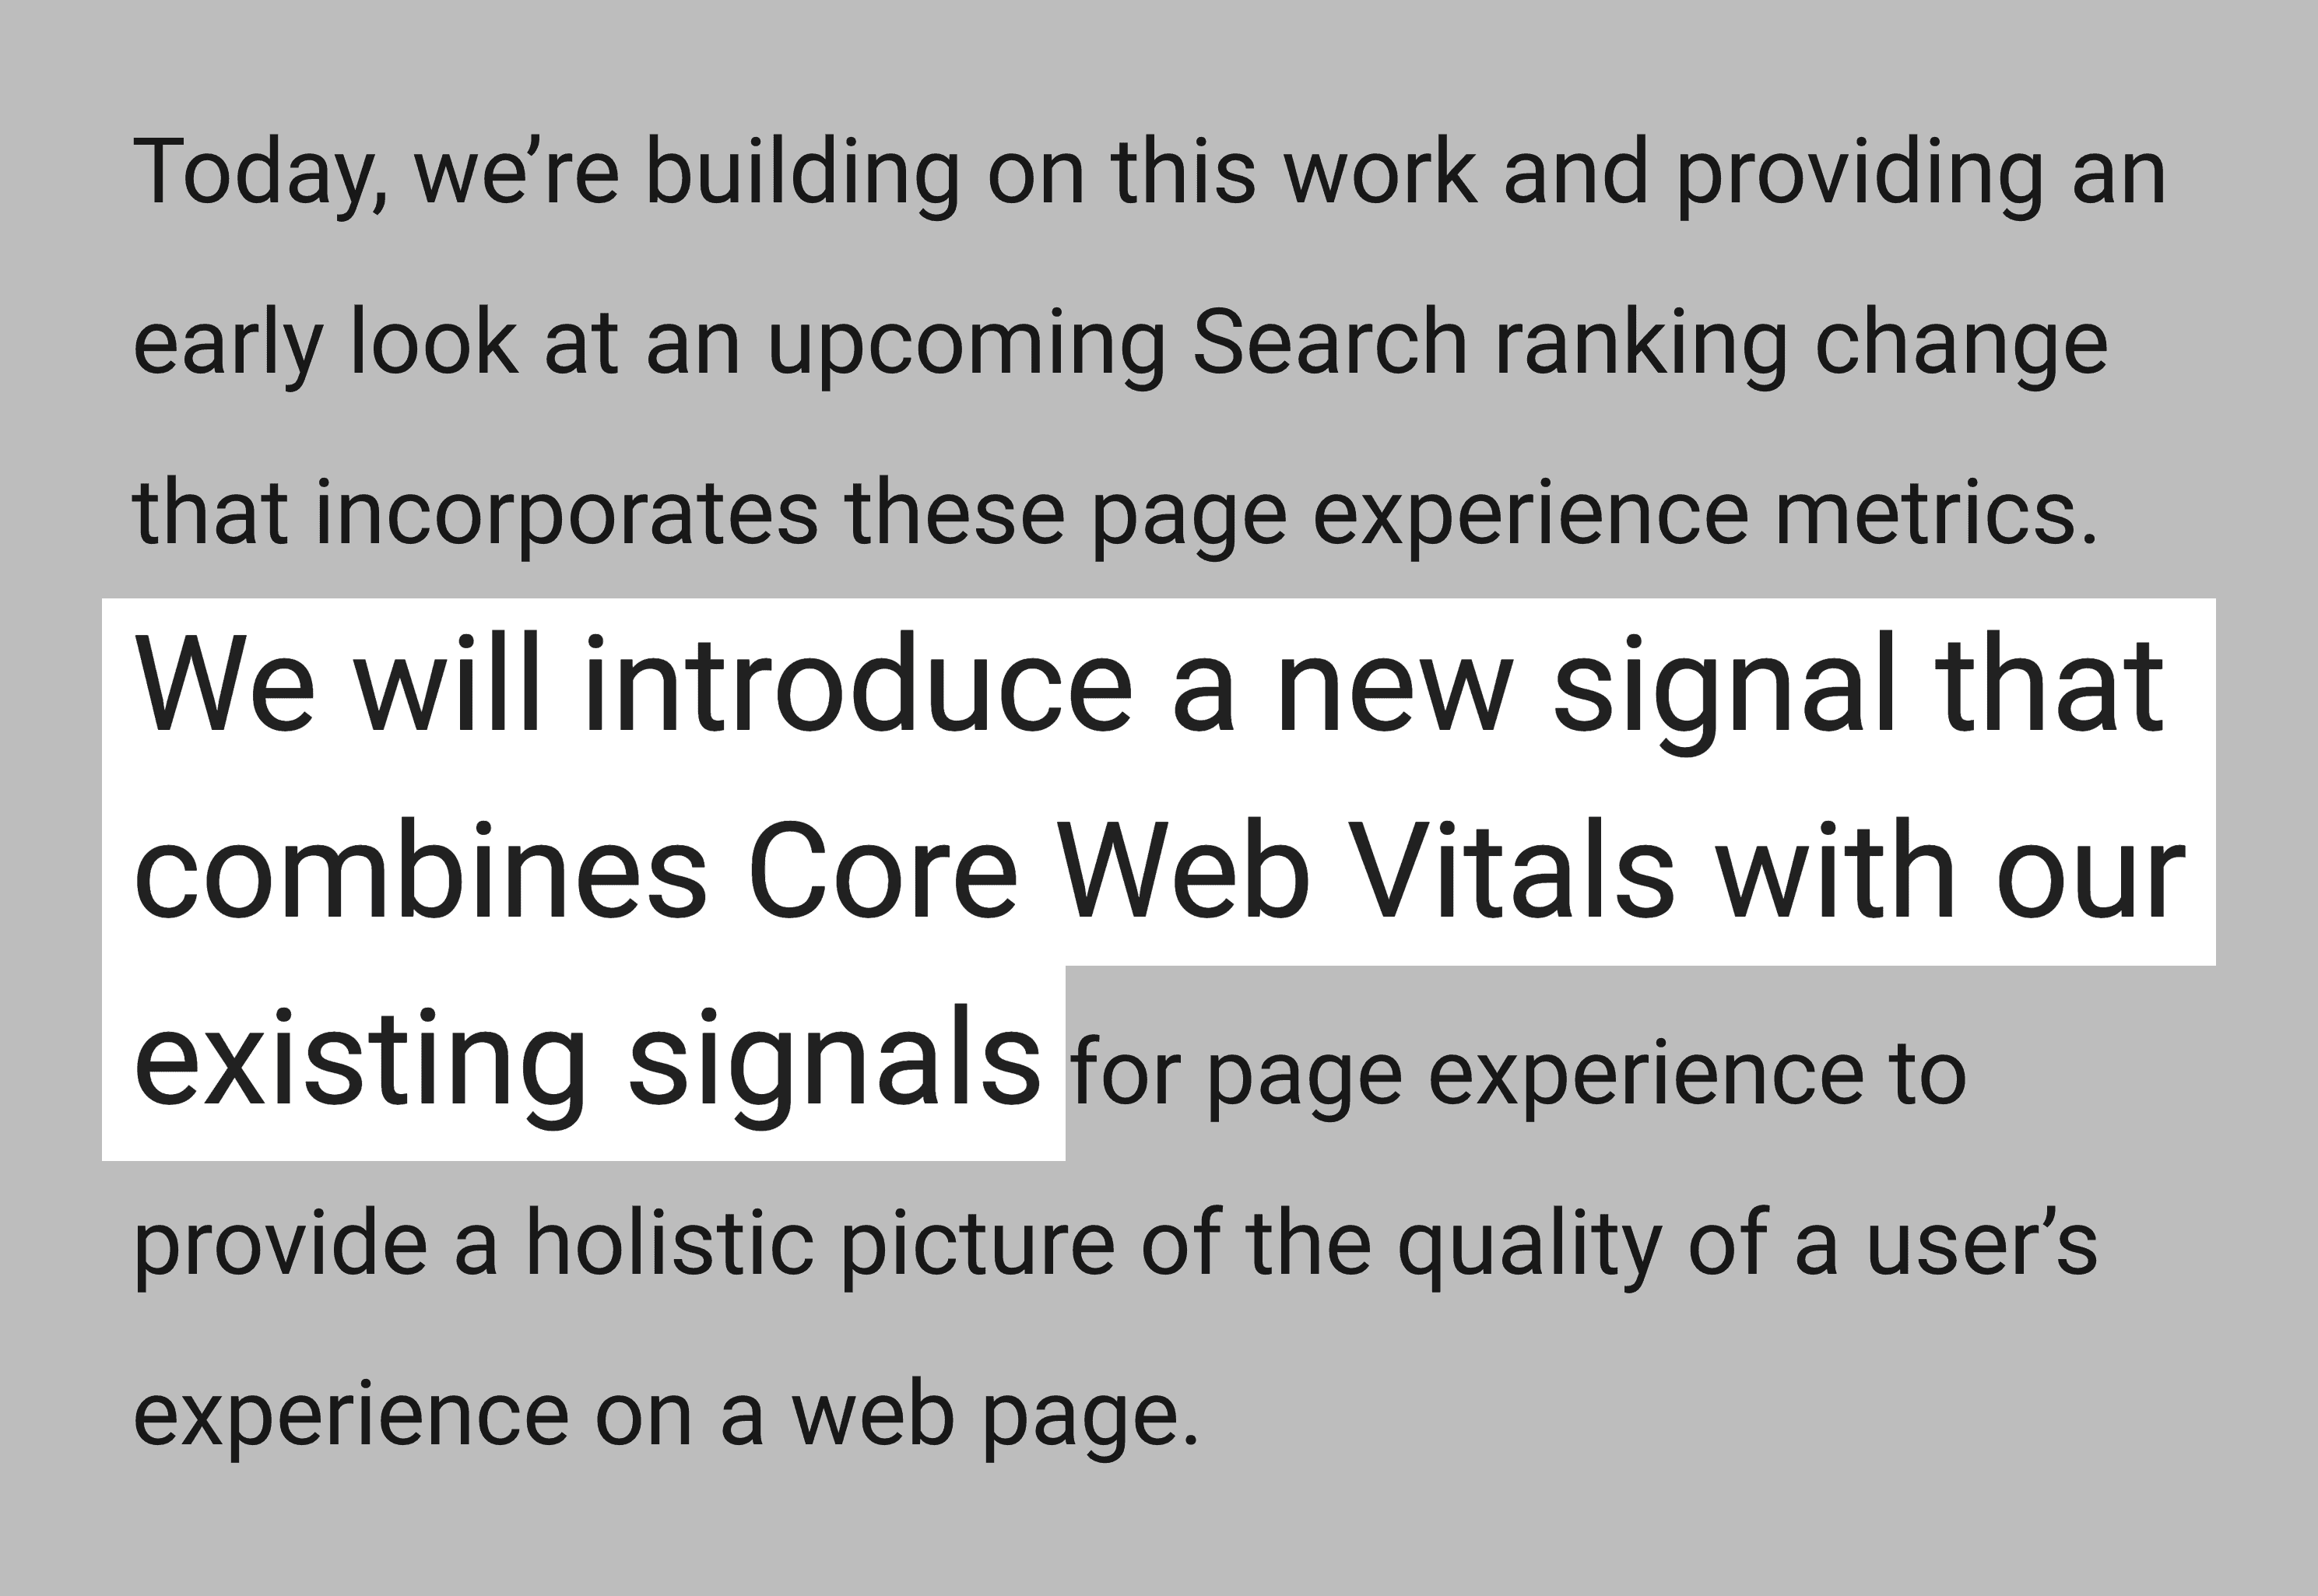 Google on core web vitals as a new signal